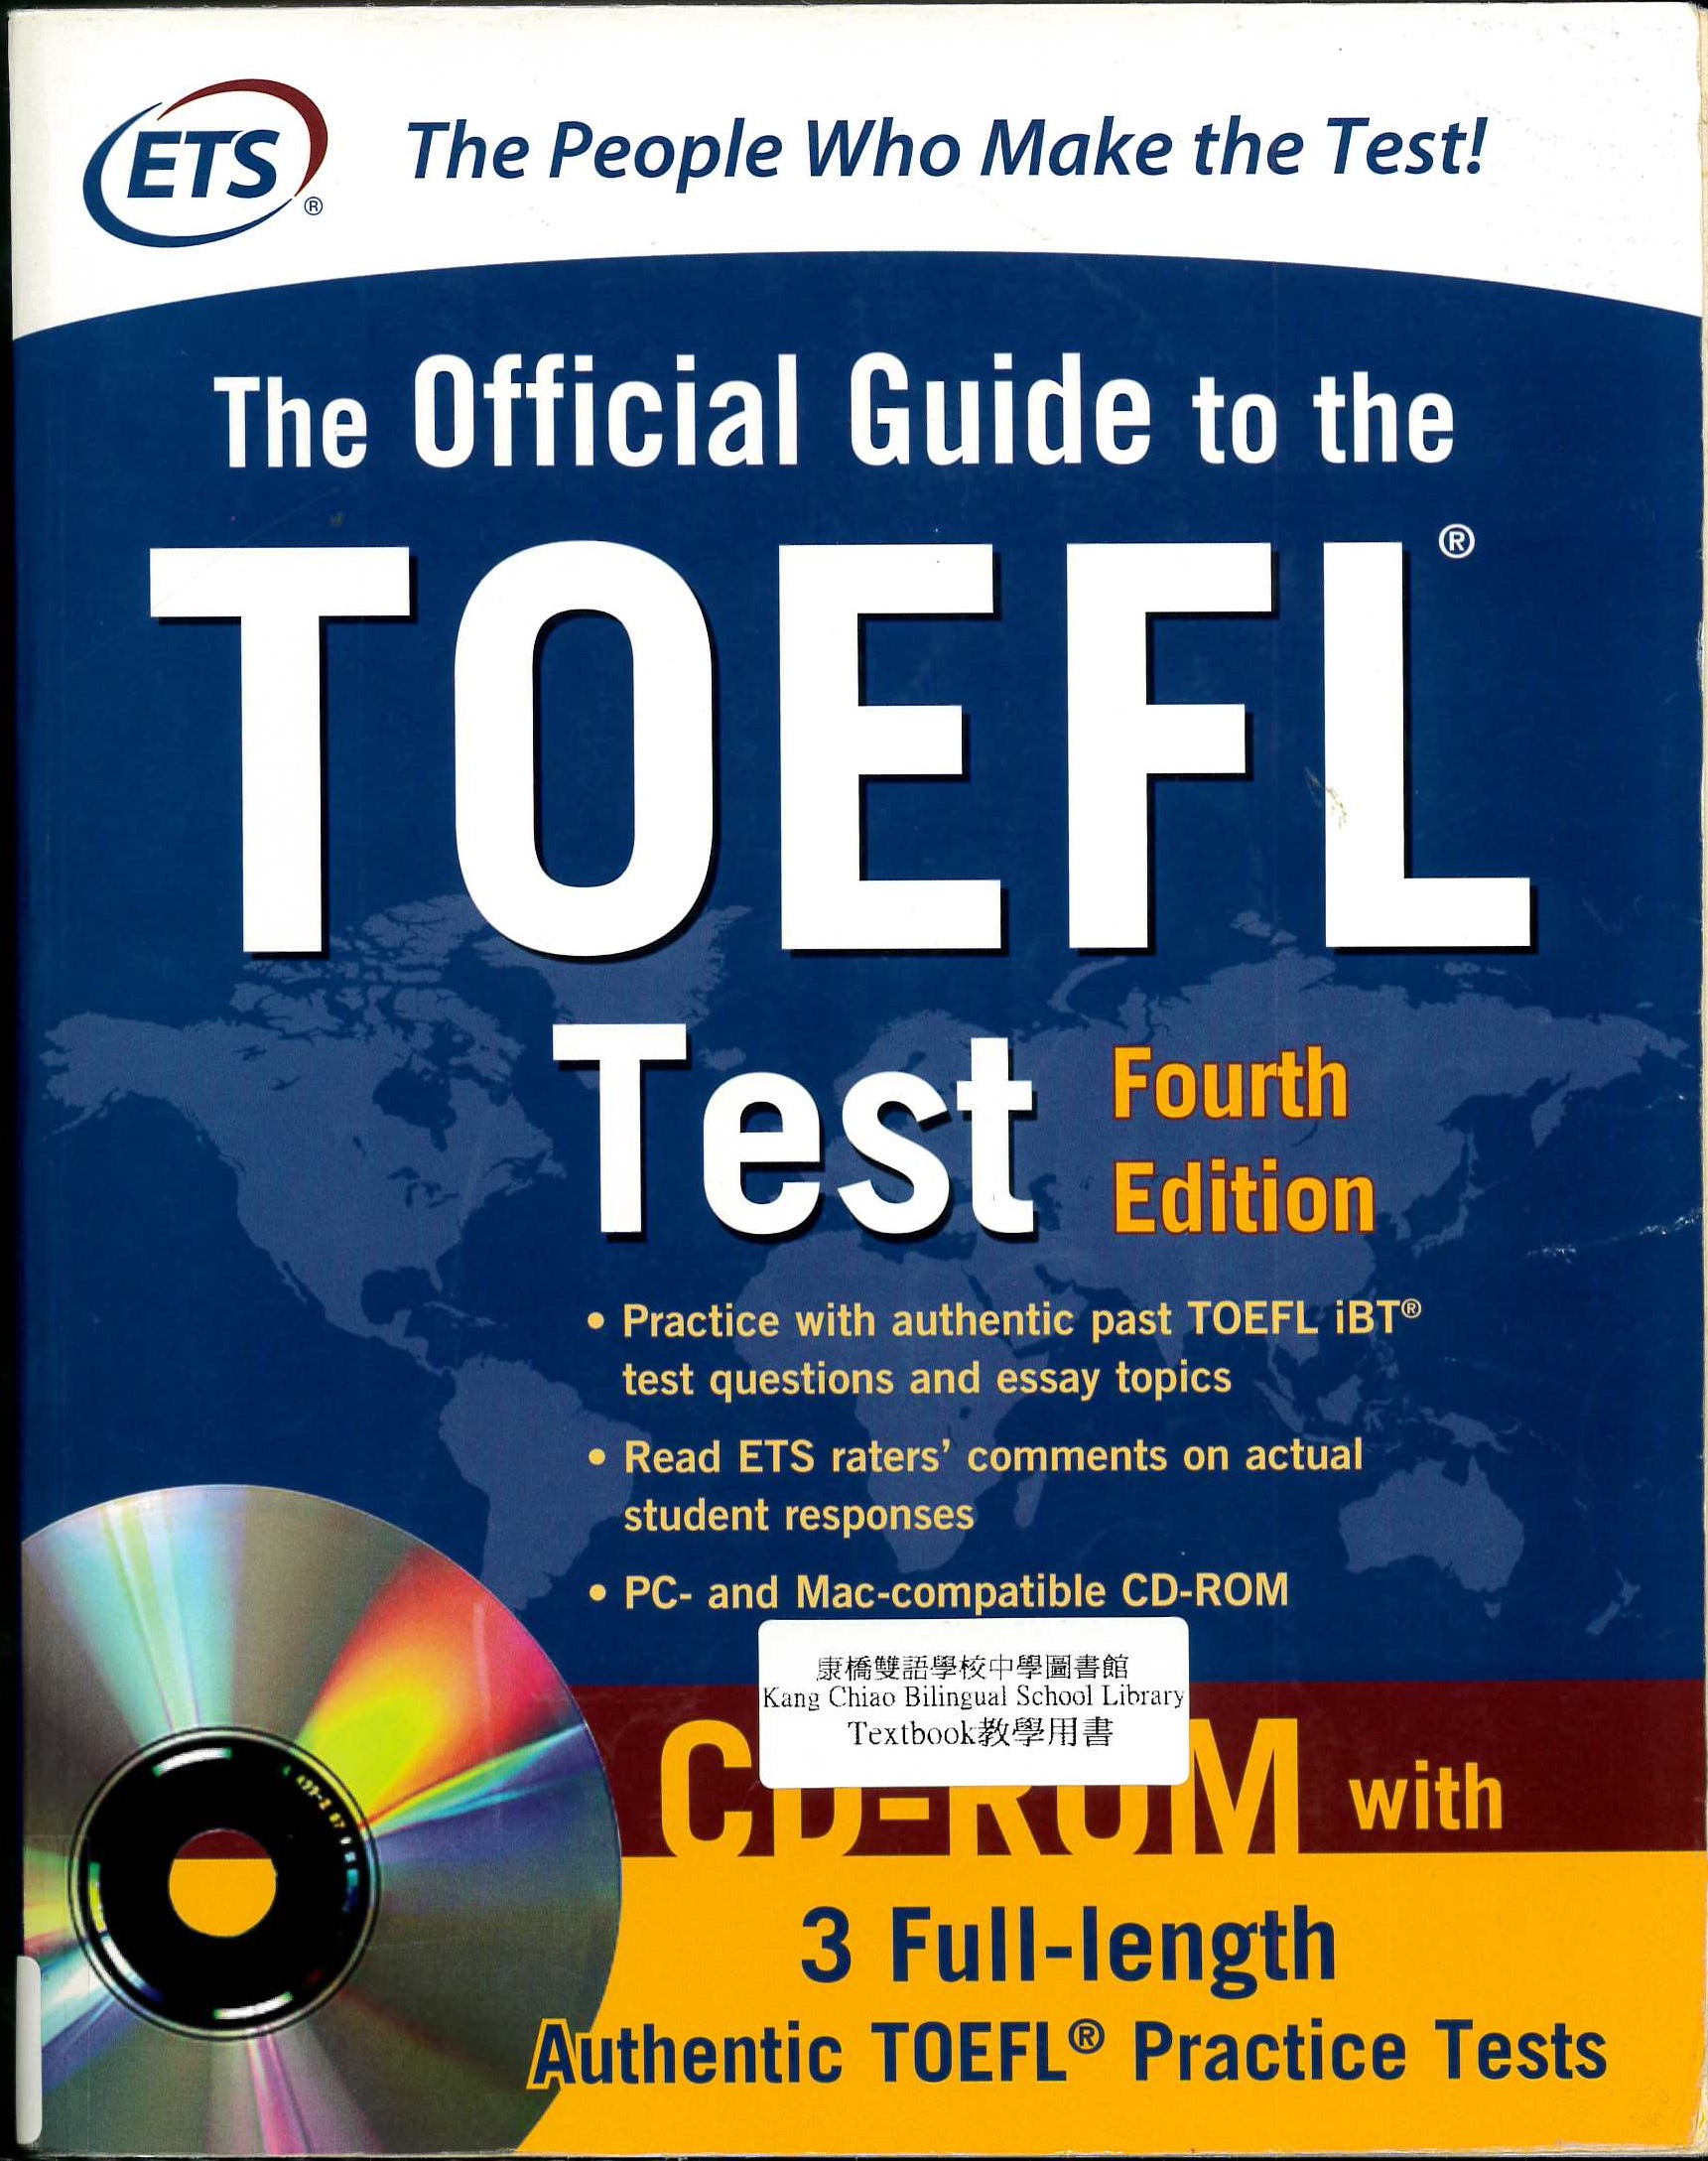 The official guide to the TOEFL test.